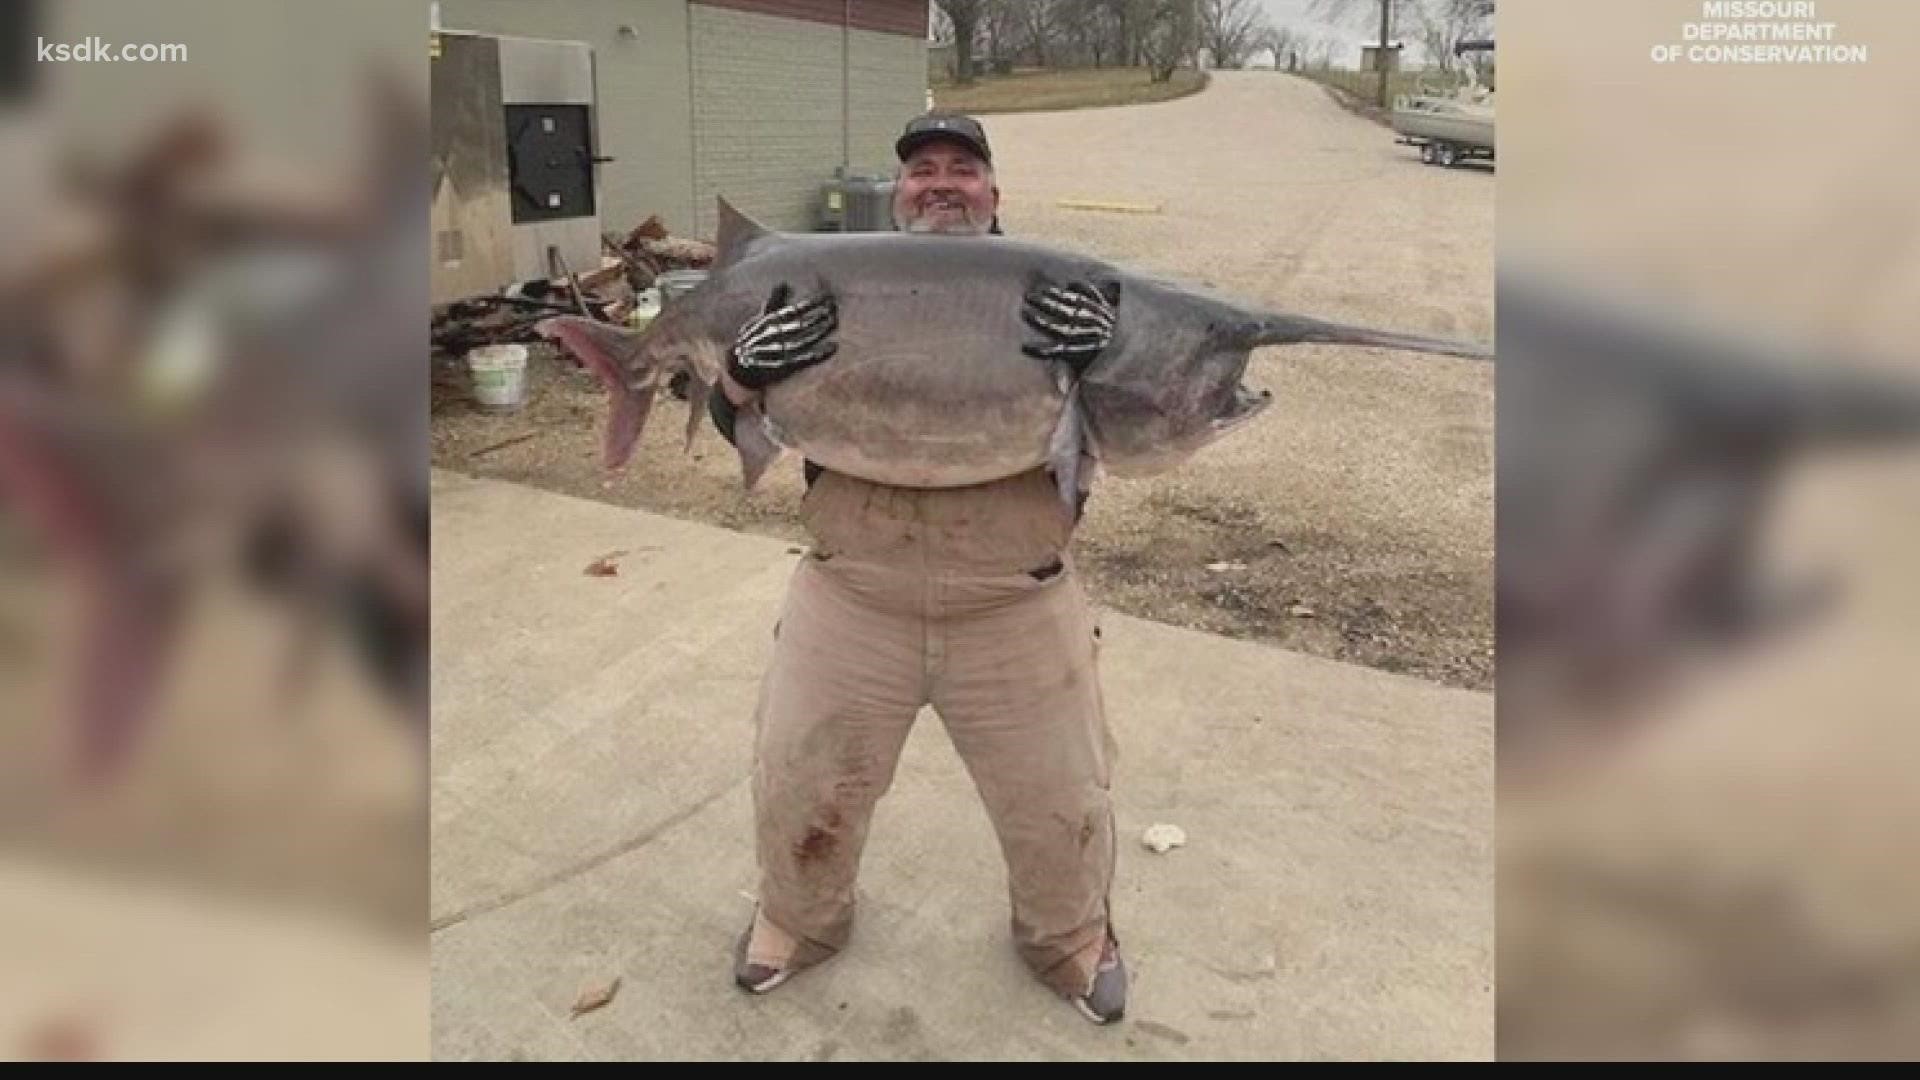 Dain said it took at least 20 minutes to get the 140-pound, 10-ounce paddlefish into the boat.